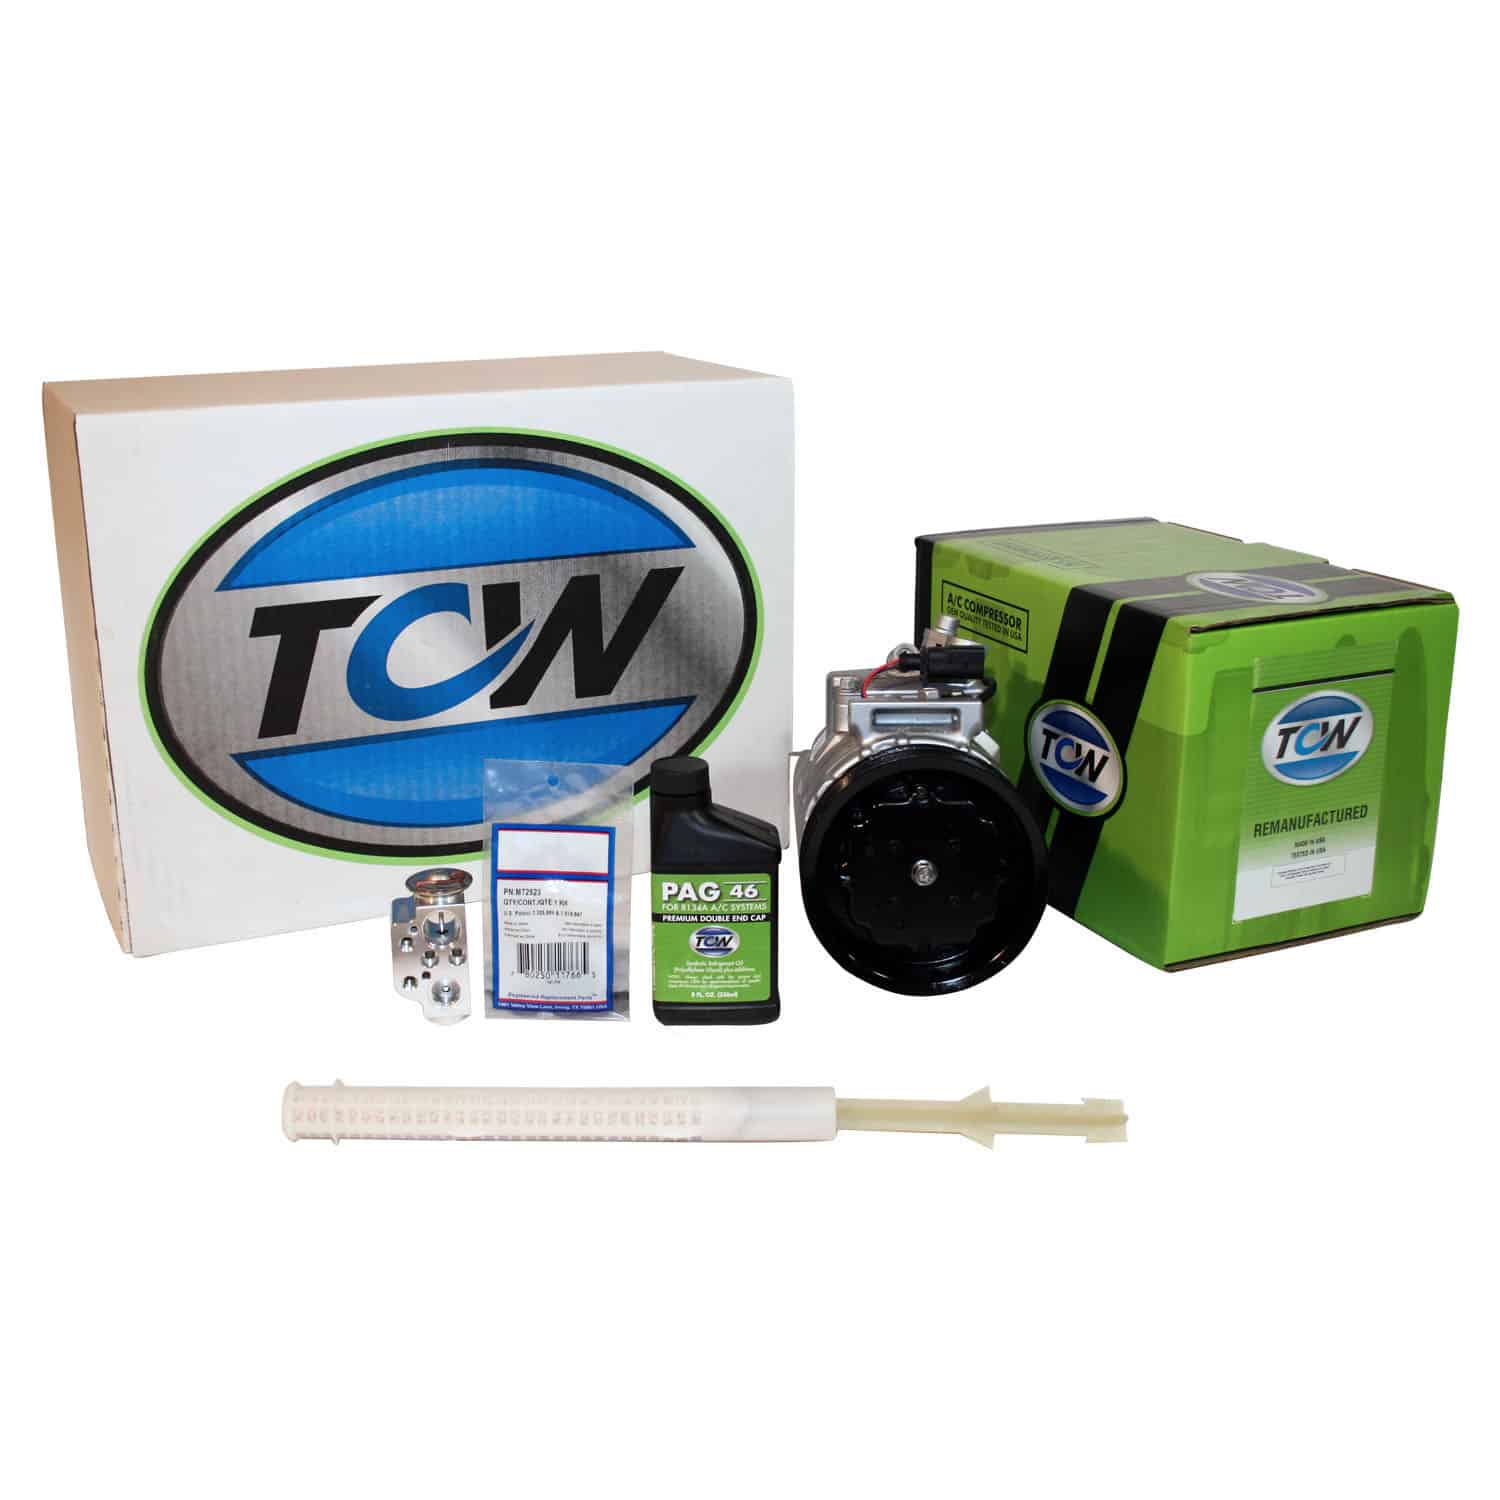 TCW Vehicle A/C Kit K1000422R Remanufactured Product Image field_60b6a13a6e67c